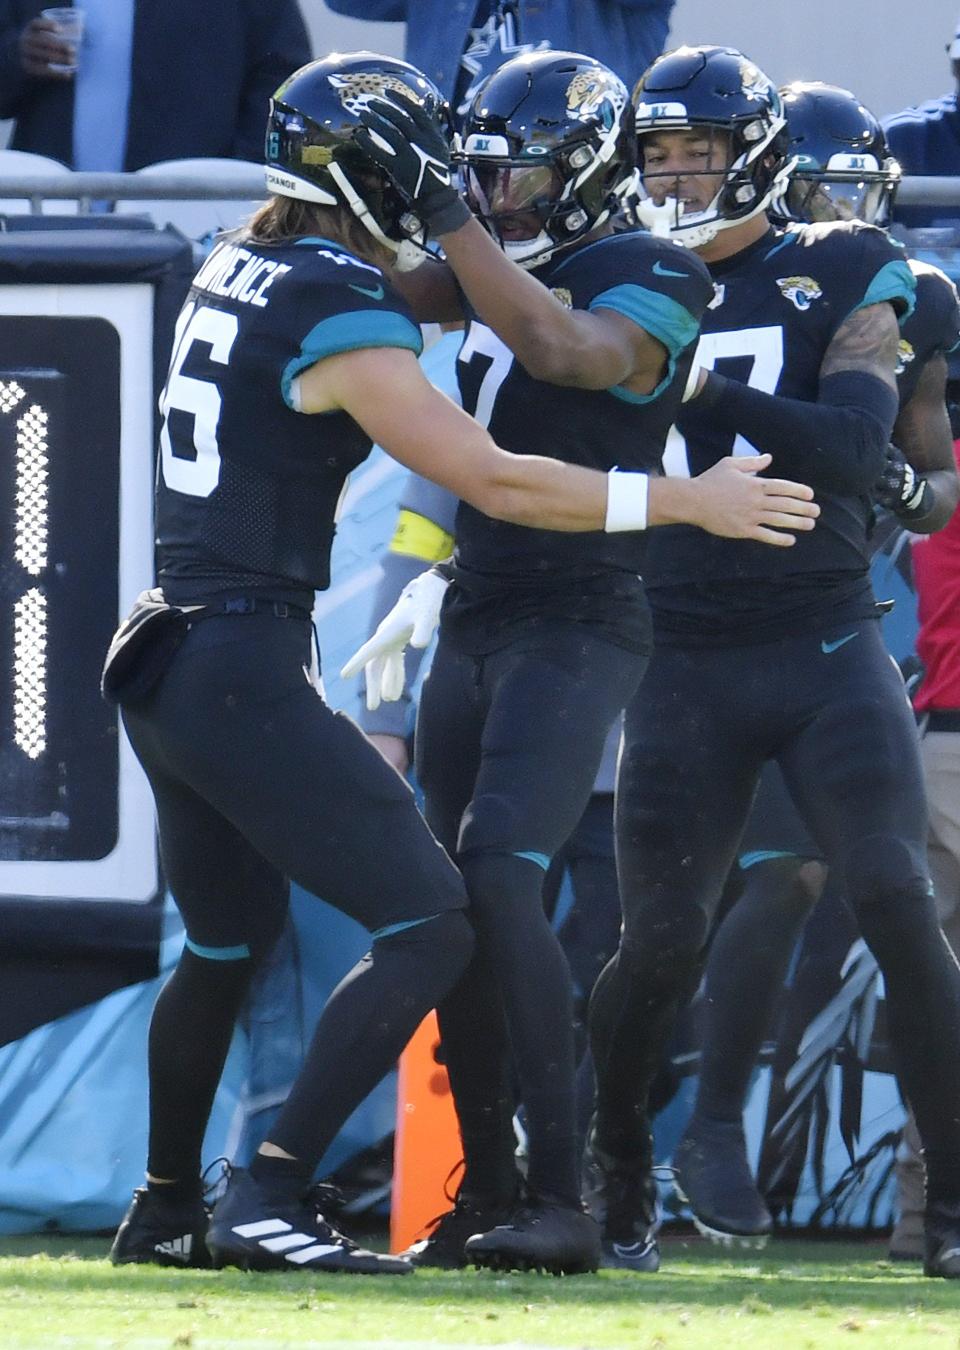 Jacksonville Jaguars wide receiver Zay Jones (7) celebrates with quarterback Trevor Lawrence (16) after they connected on their second quarter touchdown pass. The Jacksonville Jaguars hosted the Dallas Cowboys at TIAA Bank Field Sunday, December 18, 2022. The Jaguars trailed 21 to 7 at the half. [Bob Self/Florida Times-Union]